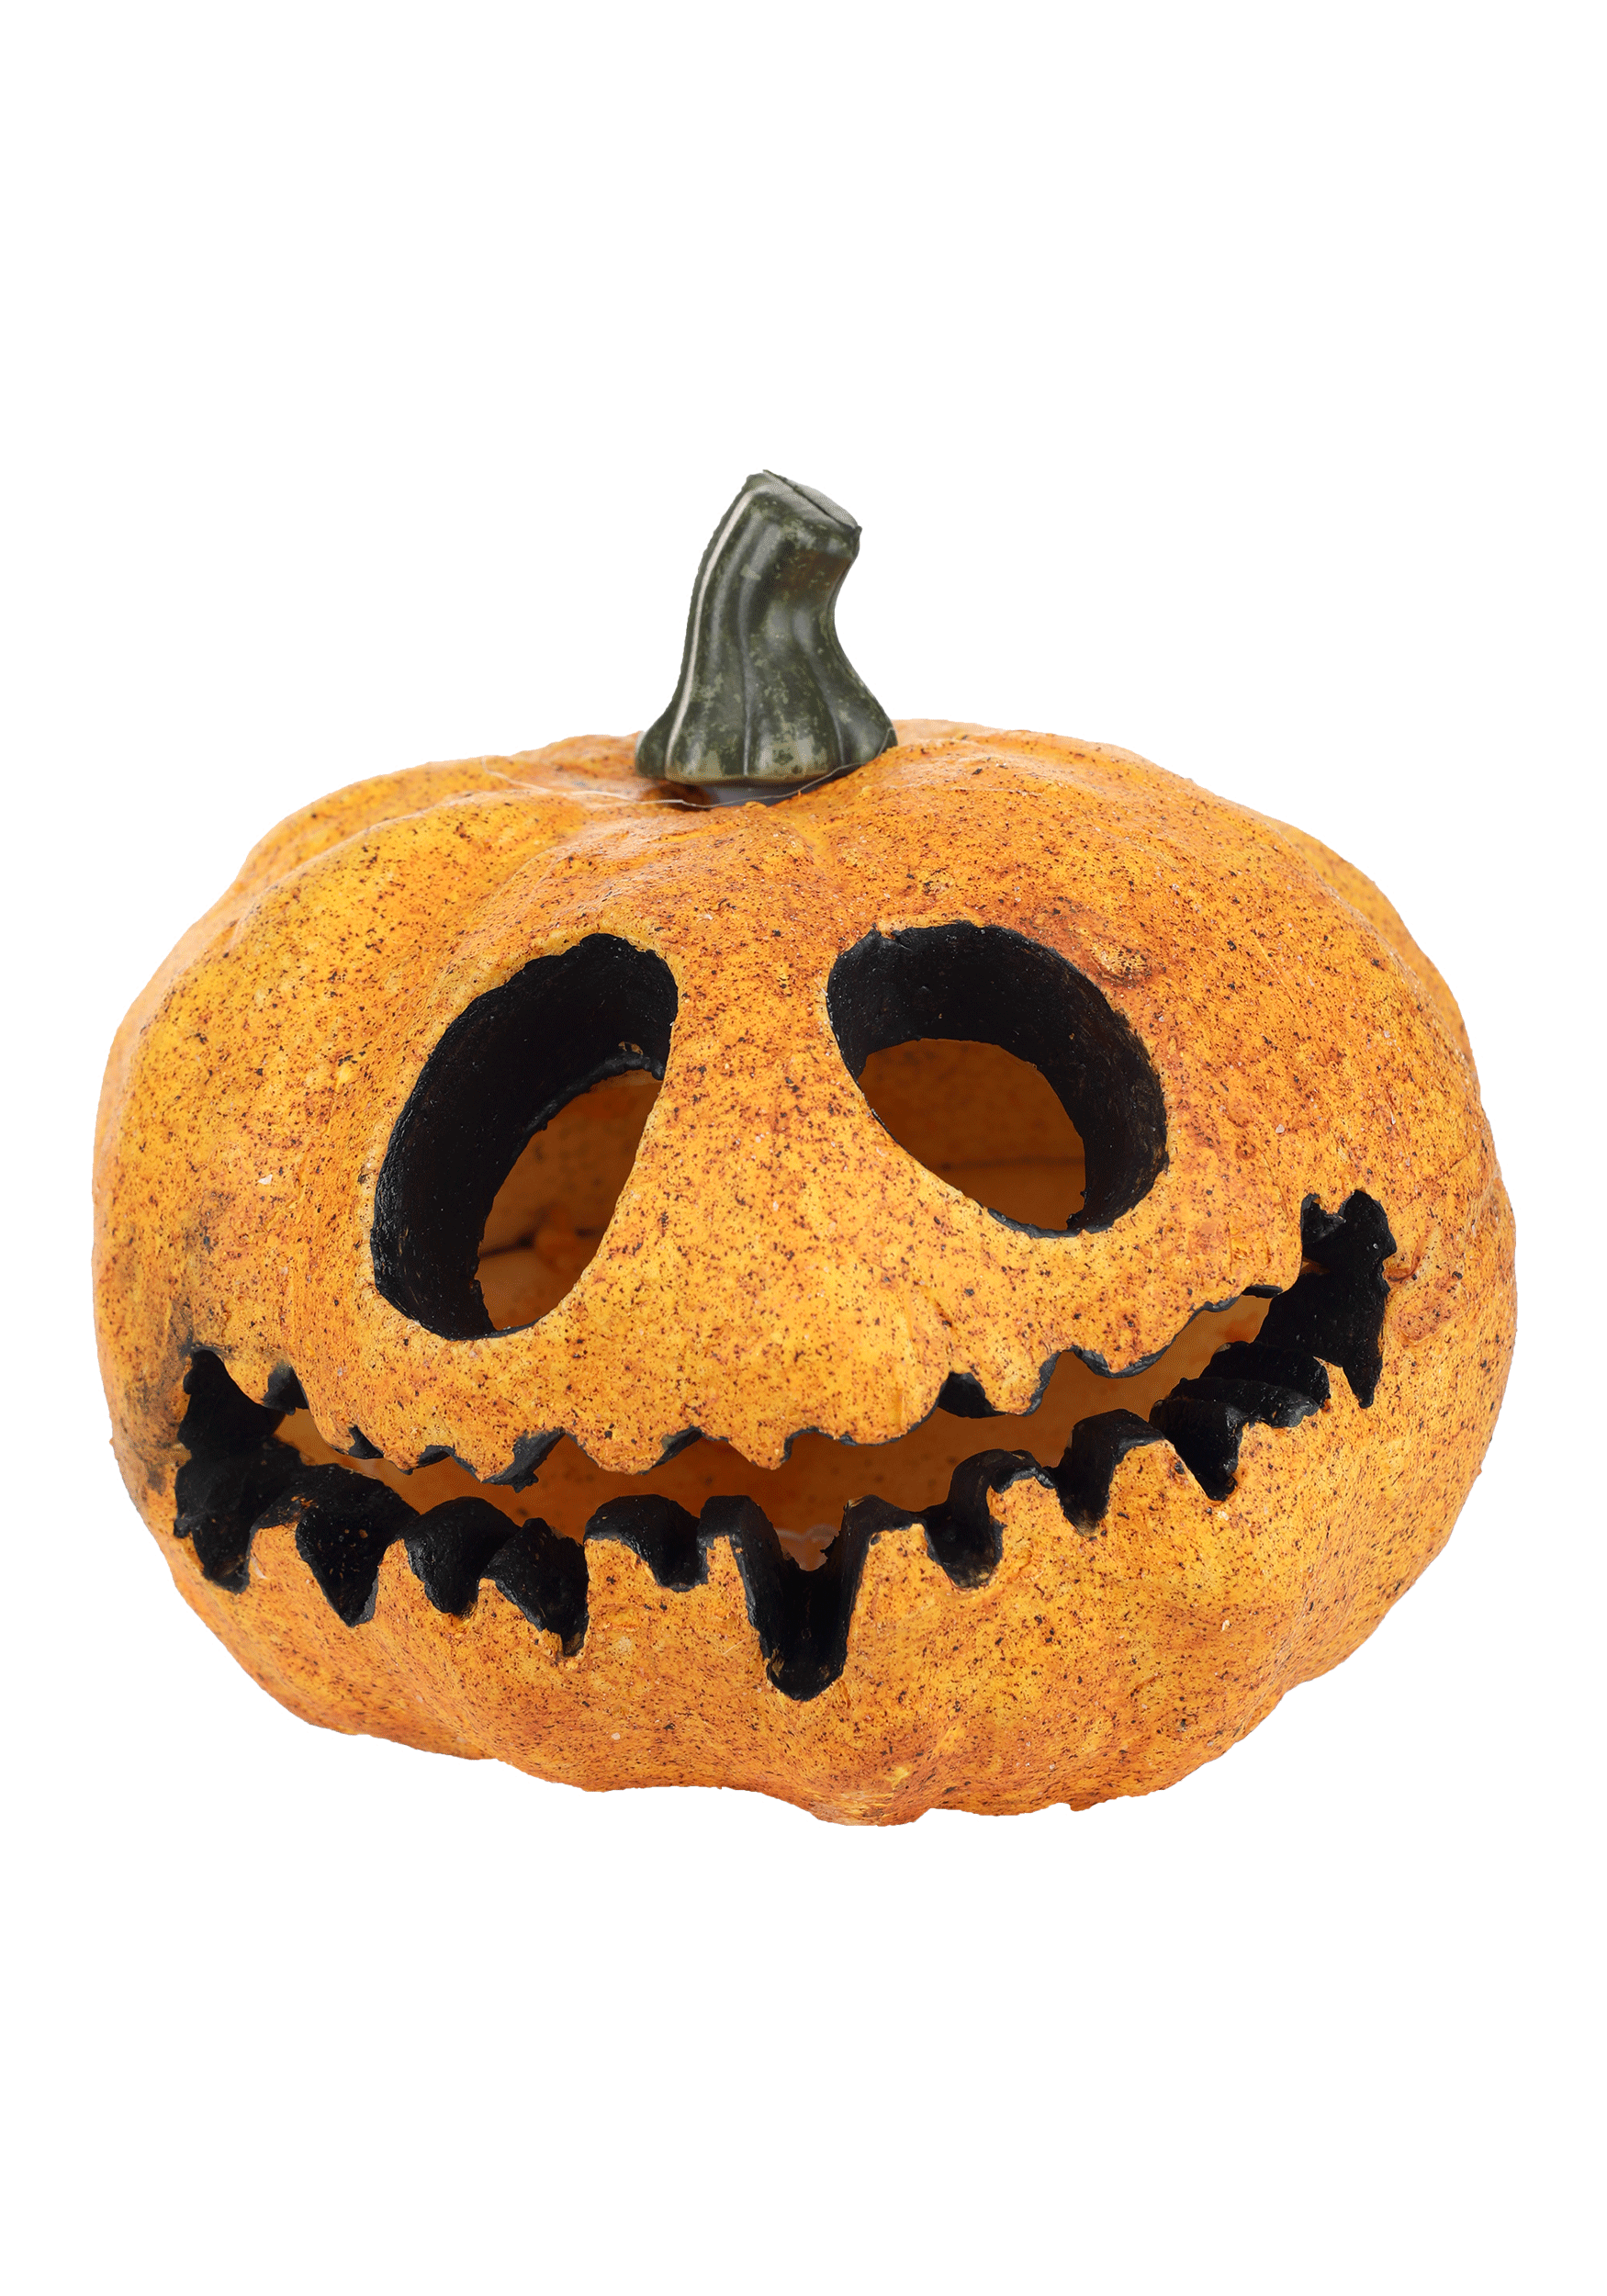 Light Up Spooky Pumpkin Face With Red Lights